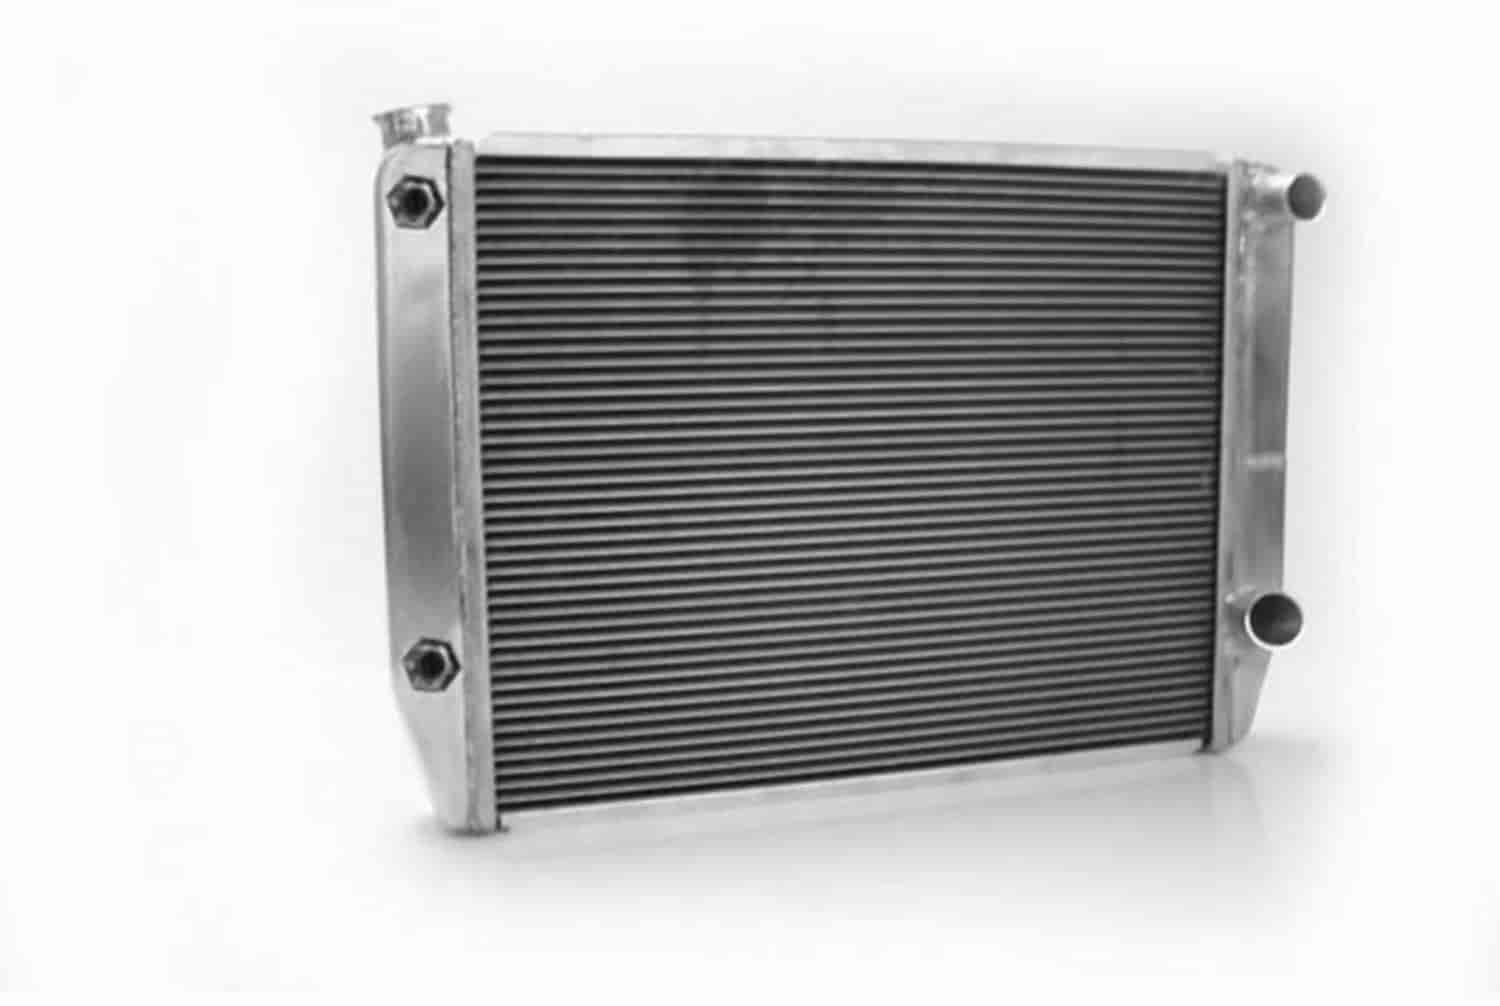 ClassicCool Universal Fit Radiator Dual Pass Crossflow Design 27.50" x 19" with Transmission Cooler